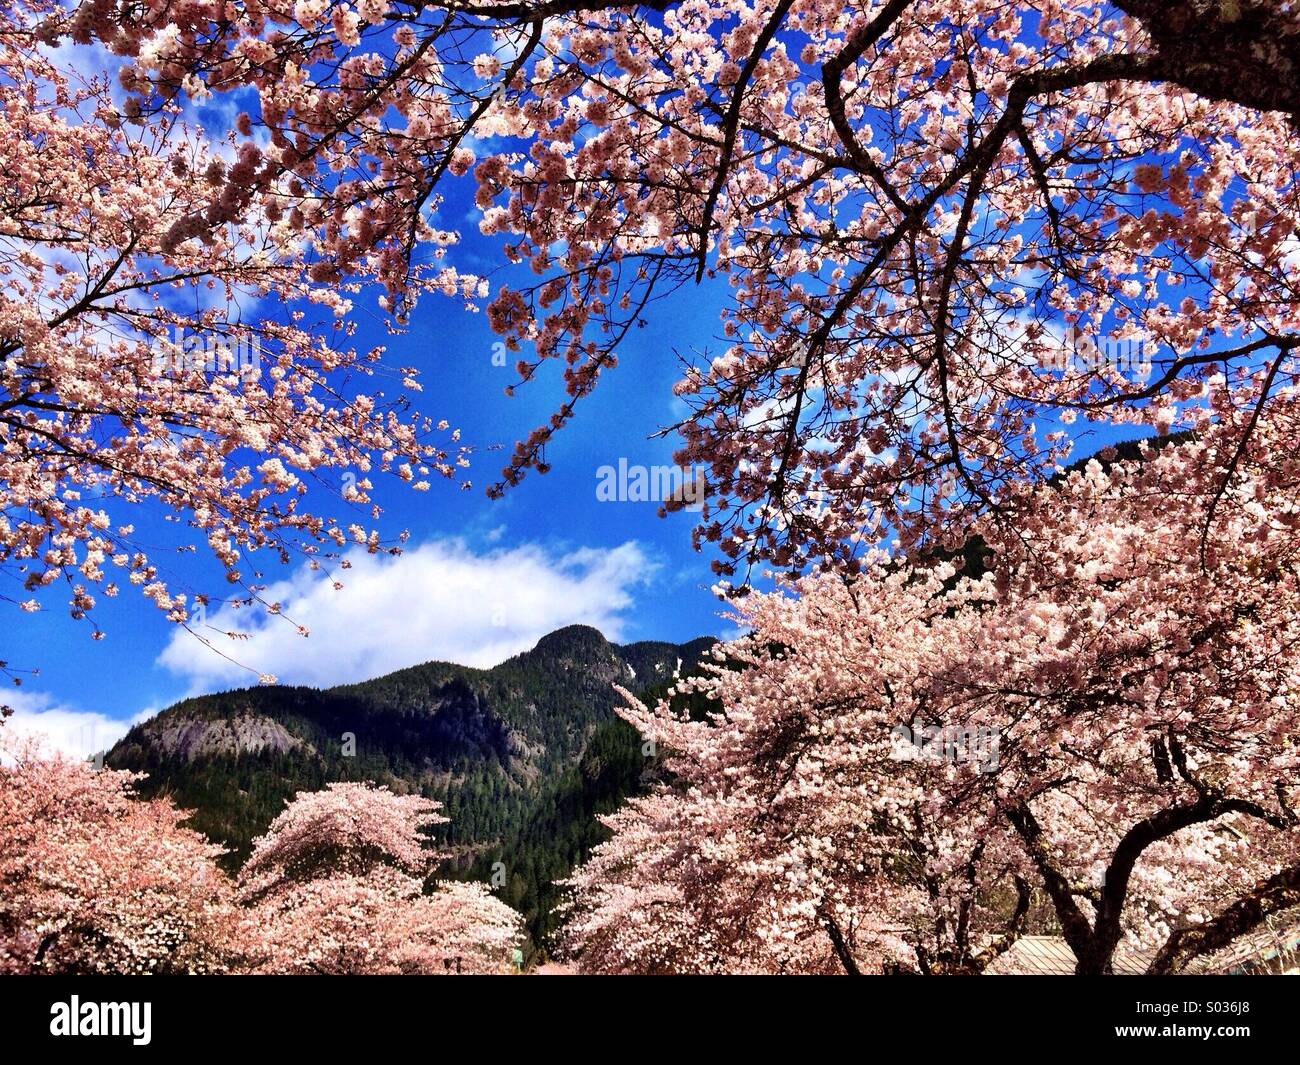 Cherry blossoms in the mountains Stock Photo